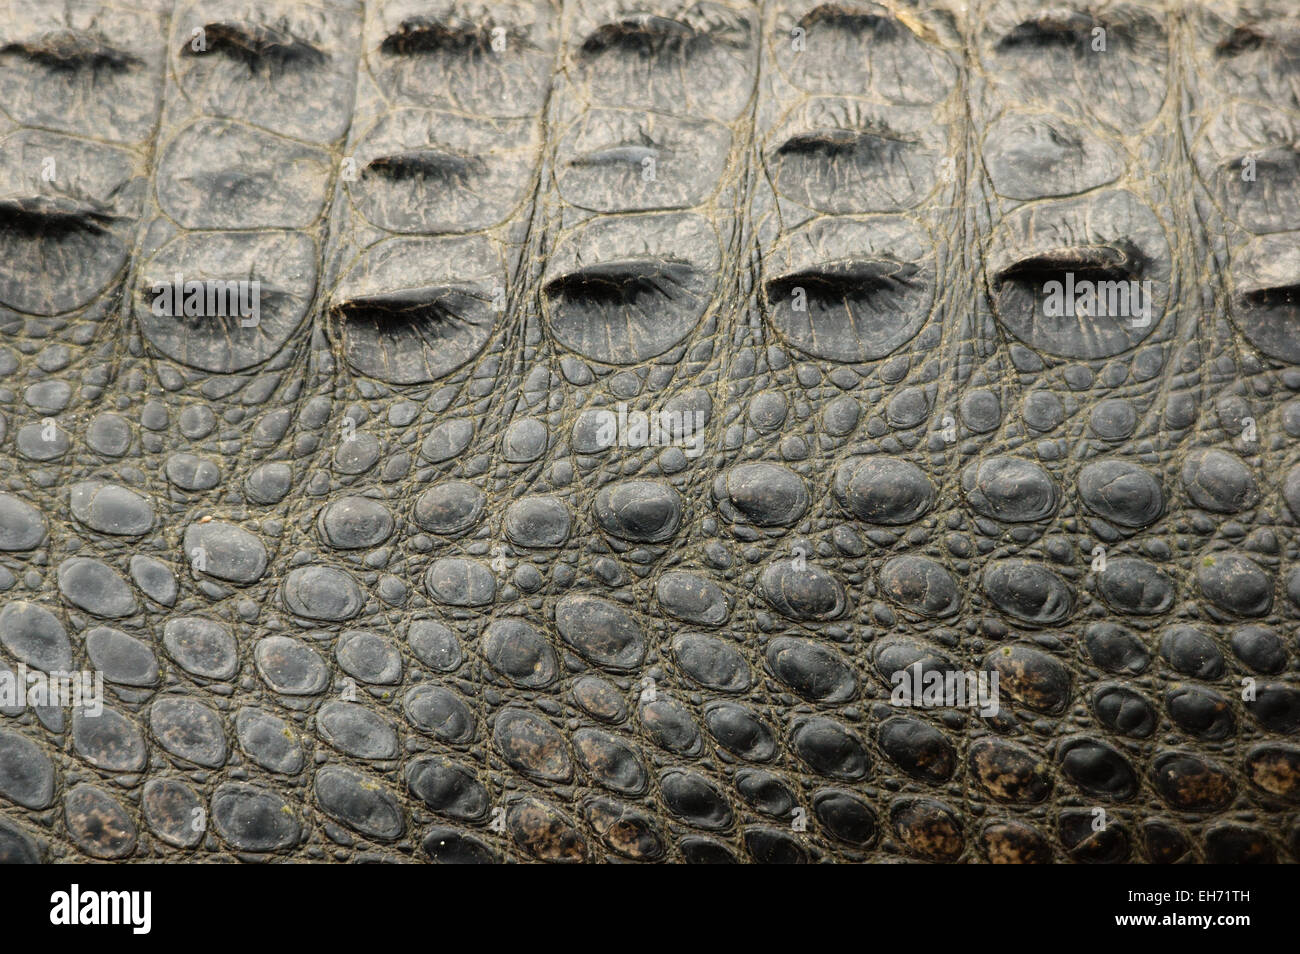 American alligator skin background texture showing side and back scales Stock Photo